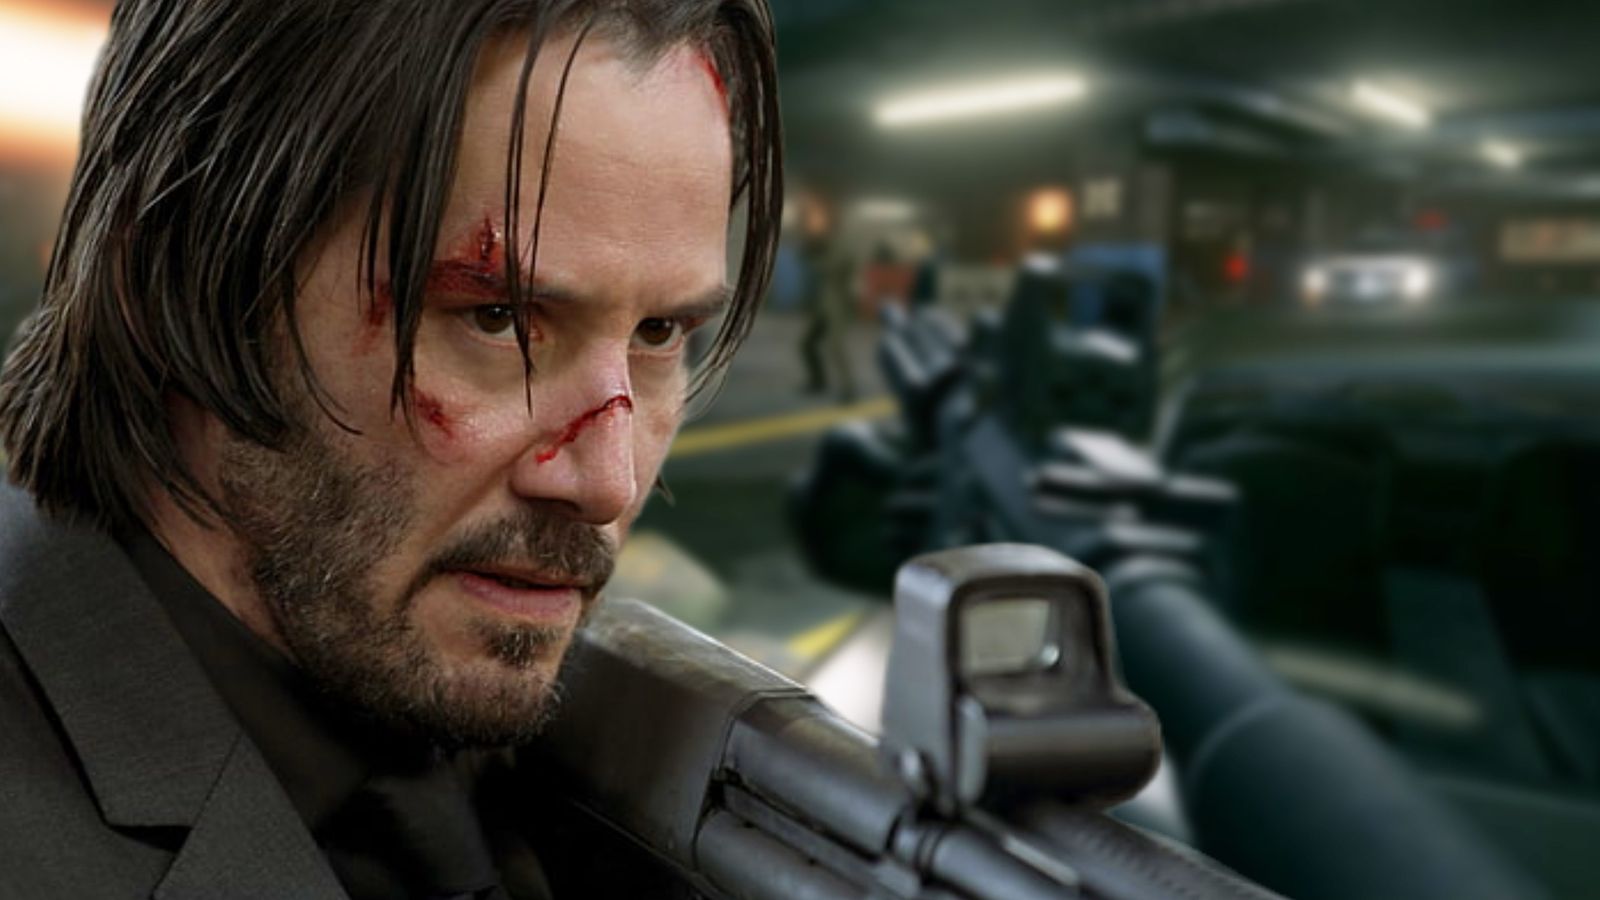 An image of Keanu reeves as John Wick imposed on a screenshot of a John Wick video game 